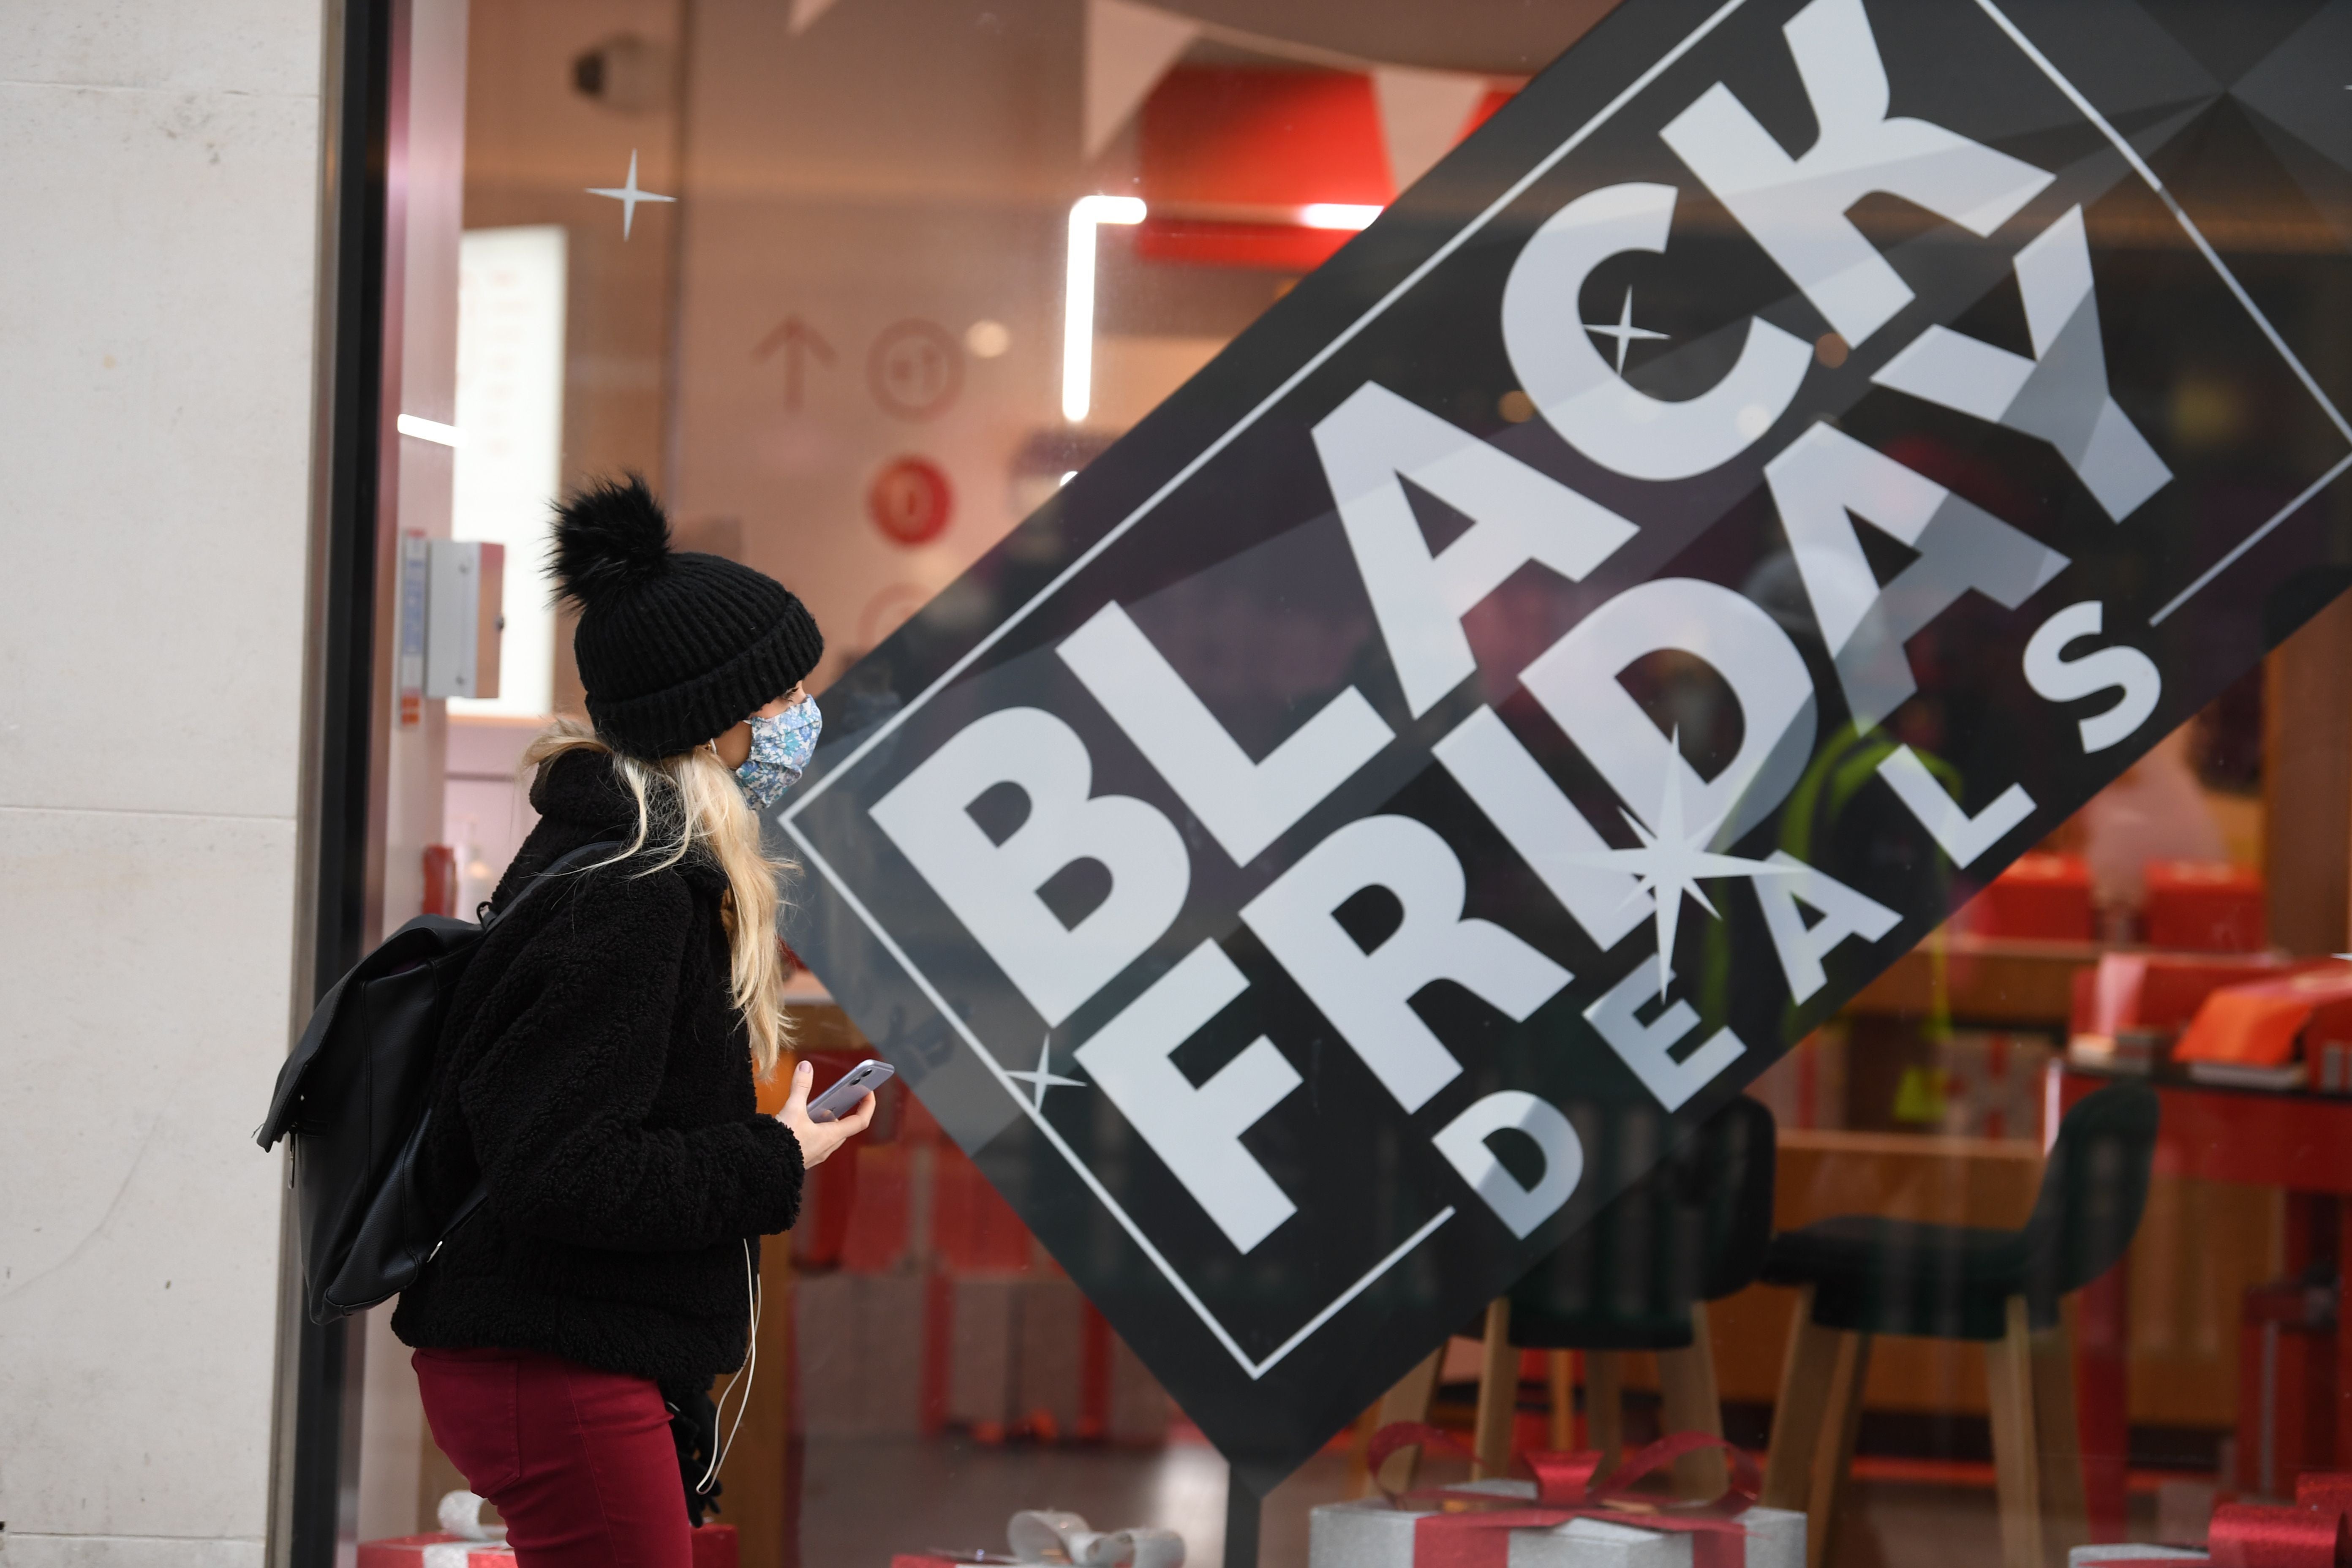 ‘Might Black Friday turn out this year to be a bit of downer on both sides of the Atlantic?’